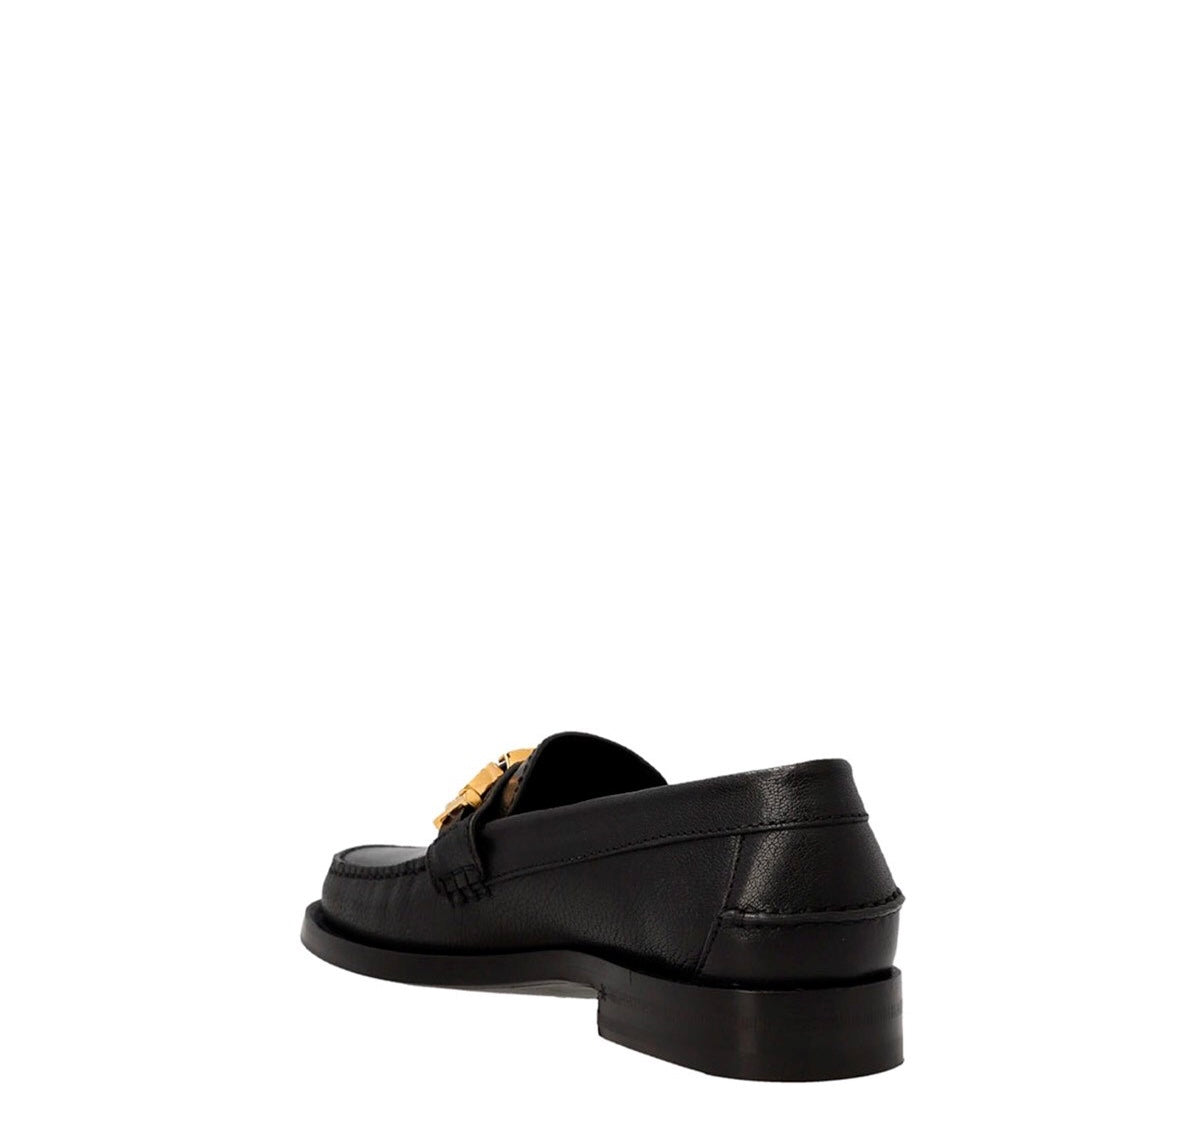 GUCCI BLACK LEATHER LOAFERS